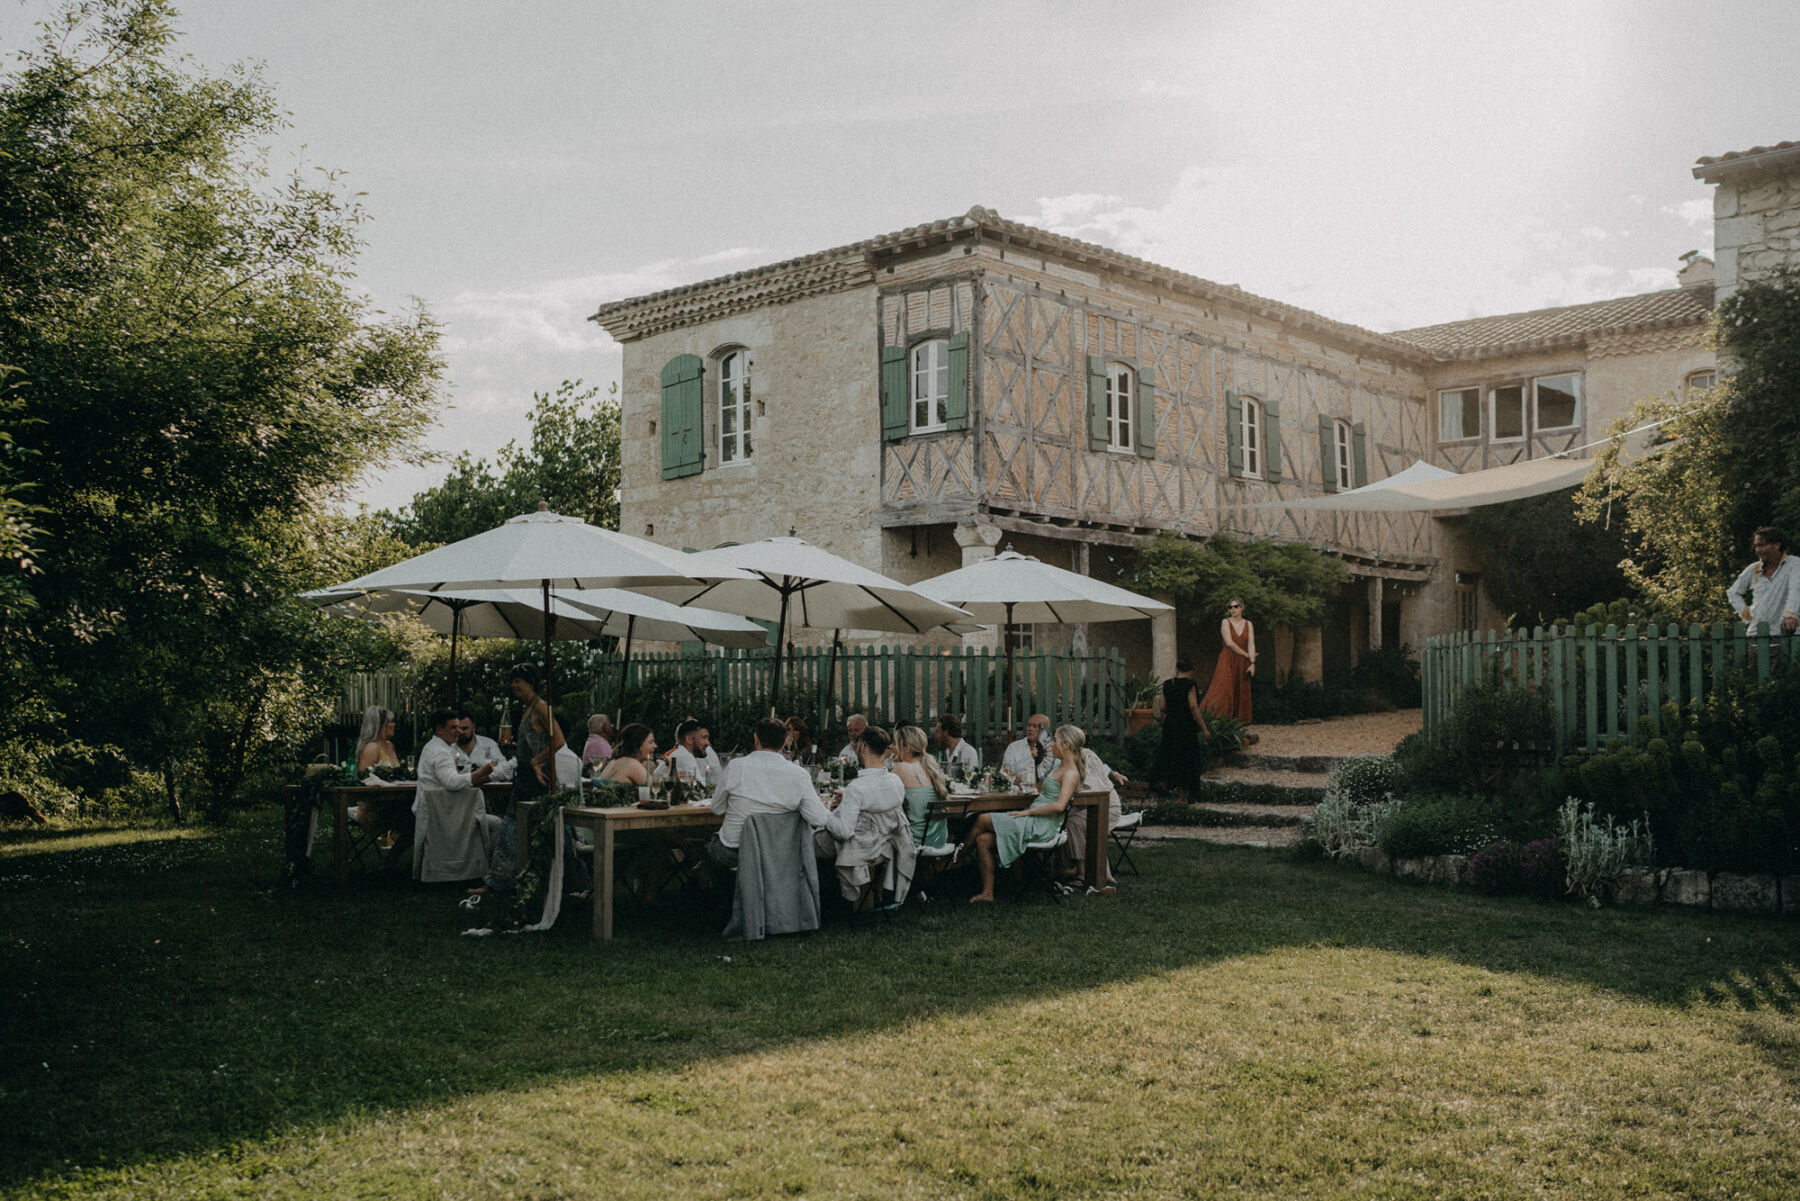 Outdoor wedding reception at a French chateau.